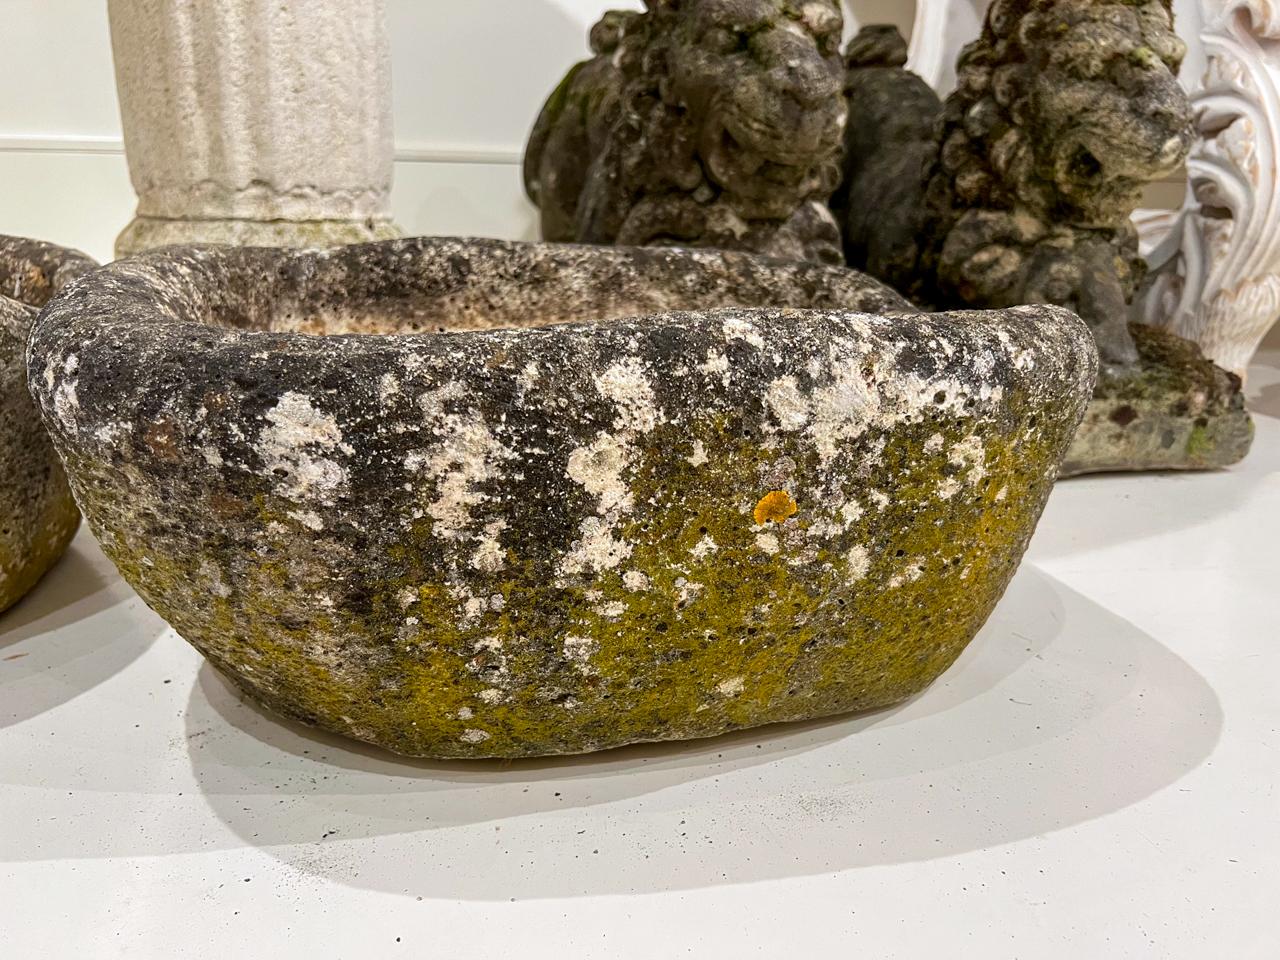 18th century stone sink with excellent patina. Perfect for a garden or a backyard.